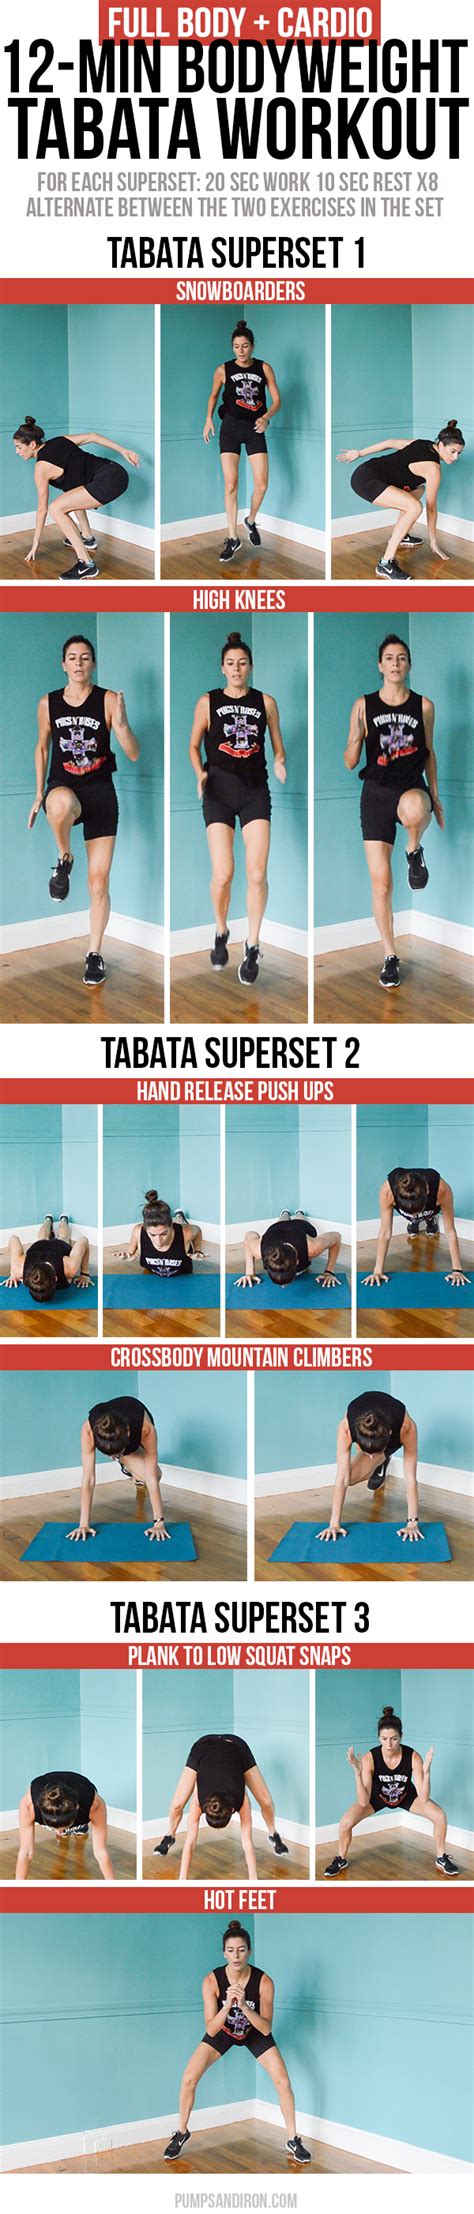 Full Body Cardio Tabata Workout Minute Long And Made Up Of Three Tabata Supersets Of